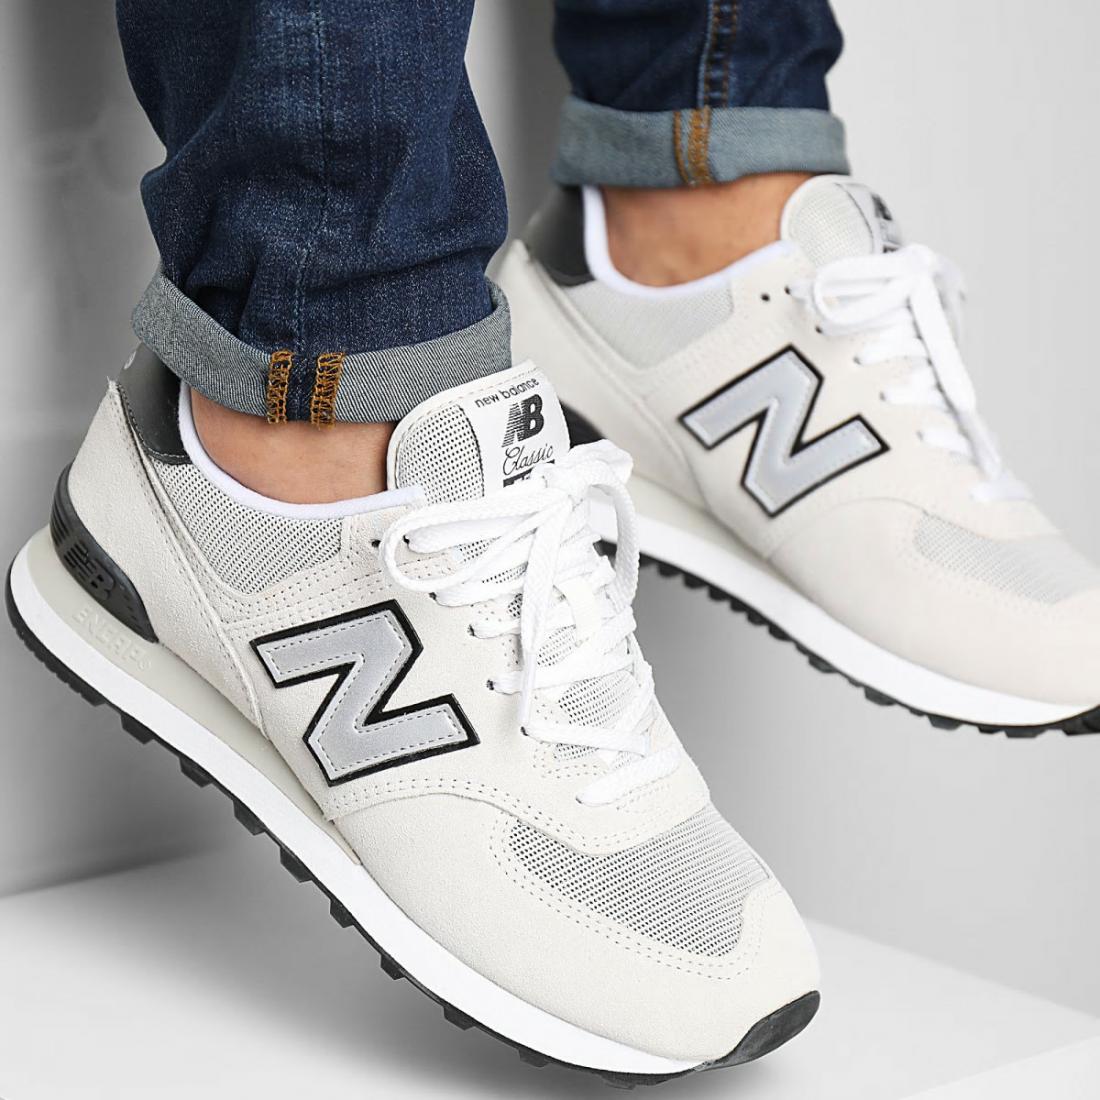 alleen afstand Wreedheid Homme New Balance Baskets Lifestyle 574 Ml574bh2 Grey Gris | Baskets Basses  · Bflyevents